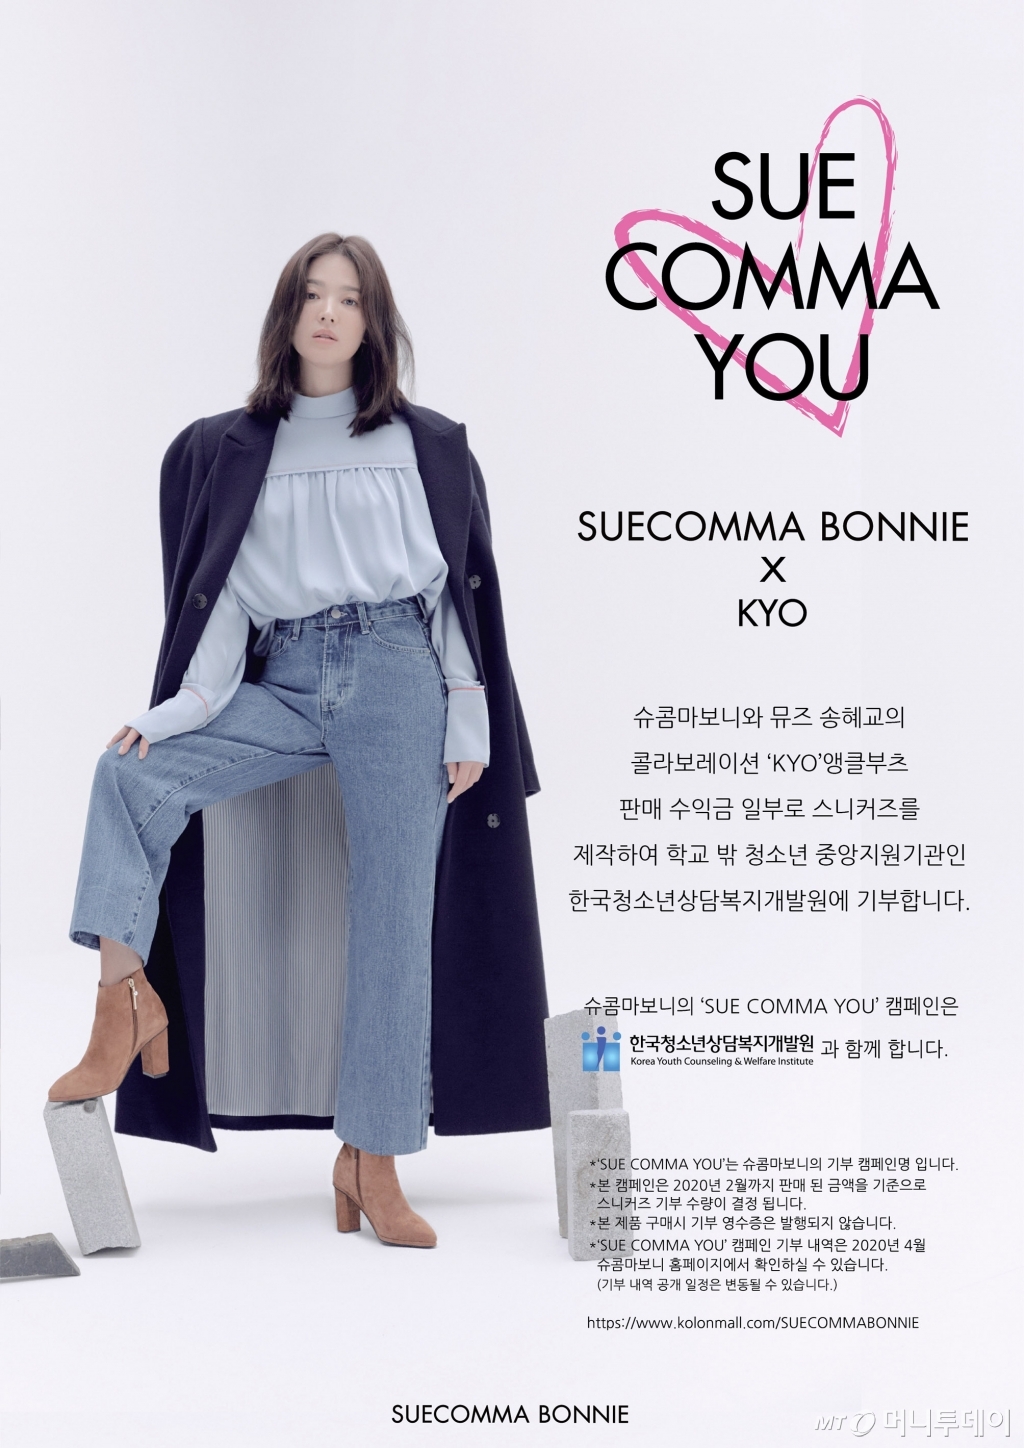 The womens shoes brand Shucomma Bonnie, developed by Kolon Industries FnC (hereinafter referred to as Kolon FnC), will carry out its first CSR project SUE COMMA YOU with Actor Song Hye-kyo on the 21st.SUE COMMA YOU (Shu Komma Yu) meant Shucomma Bonnie and you.Song Hye-kyo presented KYO, an ankle boot that reflects the design and fit that you want to wear directly.KYO used two materials: suede and leather; carmel and black. It will be available until February 2020.Shucomma Bonnie plans to make a portion of the proceeds from the sale of KYO as sneakers and donate it to the Korea Youth Counseling and Welfare Development Institute.It runs programs for out-of-school youths who can not maintain their studies for economic reasons.This project, which coincides with the brand model Song Hye-kyo, is the first social contribution activity of Shucomma Bonnie.We have opened up the CSR activities with the design and products that can be best done as a fashion shoes brand, he said. We will continue to work on projects that can return to society as much as we have received.Shucomma Bonnie will be promoting SUECOMMA BONNIE x KYO from October 21. Shucomma Bonnies silk scarf will be presented to customers who purchased the ankle boots at Kolon Mall.Annkle boots sales proceeds designed by Song Hye-kyo, donating sneakers to out-of-school youth